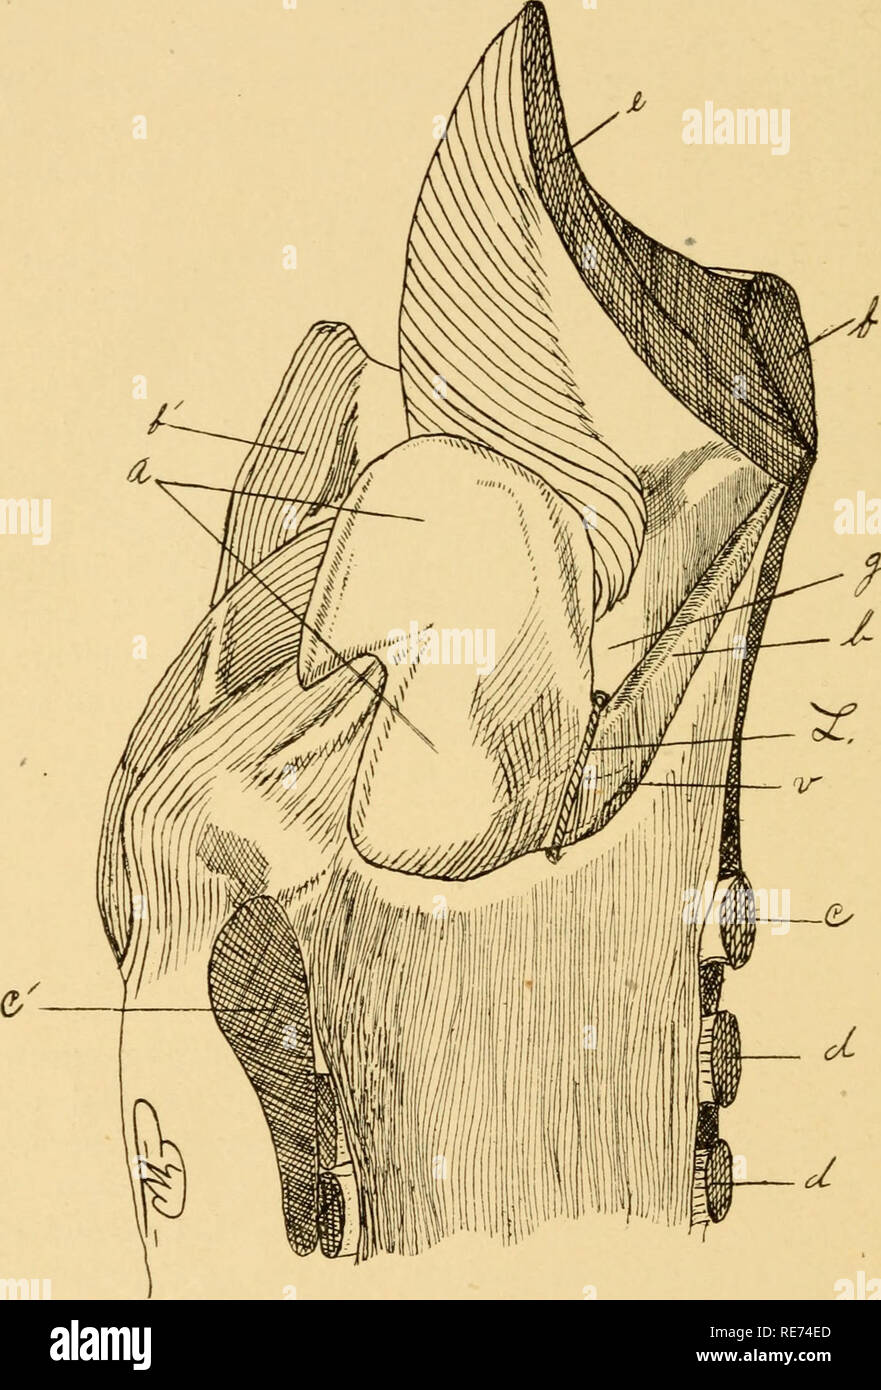 . A course in surgical operations for veterinary students and practitioners. Veterinary surgery. [from old catalog]. 24 A ryte7ioidrraphy. wound with retractors and control all hemorrhage before proceeding further. ^. Fig. II.—Median longitudinal section of the larynx, showing location of the ligature in arytenoidrraphy (diagrammatic), a, The left arytenoid cartilage ; b, left vocal cord ; c, cricoid cartilage ; c', bezePof cricoid cartilage ; d, d', tracheal rings ; e, epiglottis ; f, base of the thyroid cartilage ; f left ala of thyroid cartilage ; g, supraglottal sinus ; ^', dotted lines r Stock Photo